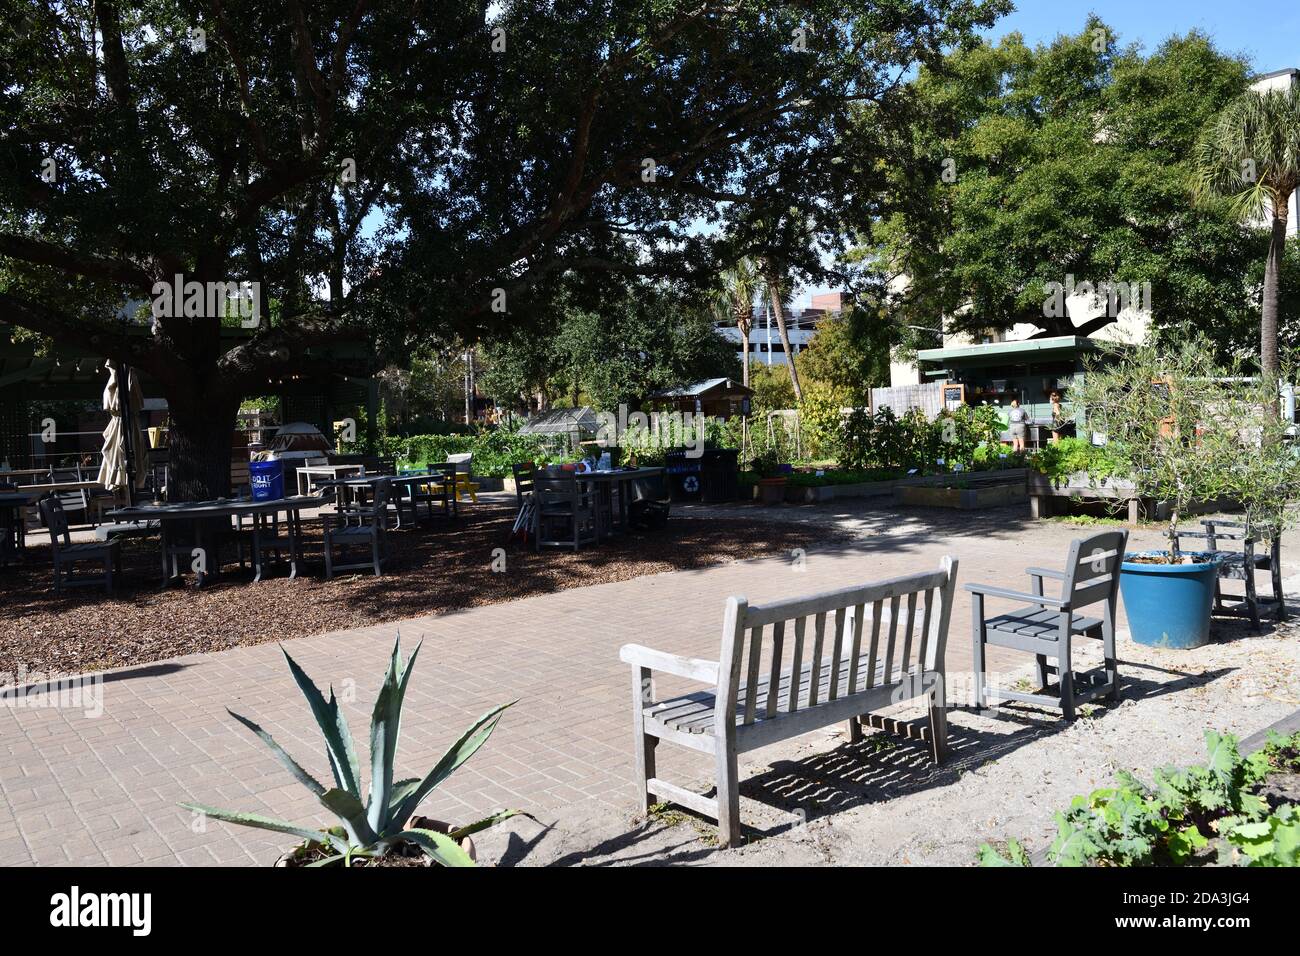 Urban Gardens; Their Settings of an 1850 English Village in USA for Elderly, Kale, Plants, Growing Greens, Trolley, Fire Station,Picnic in Garden. Stock Photo